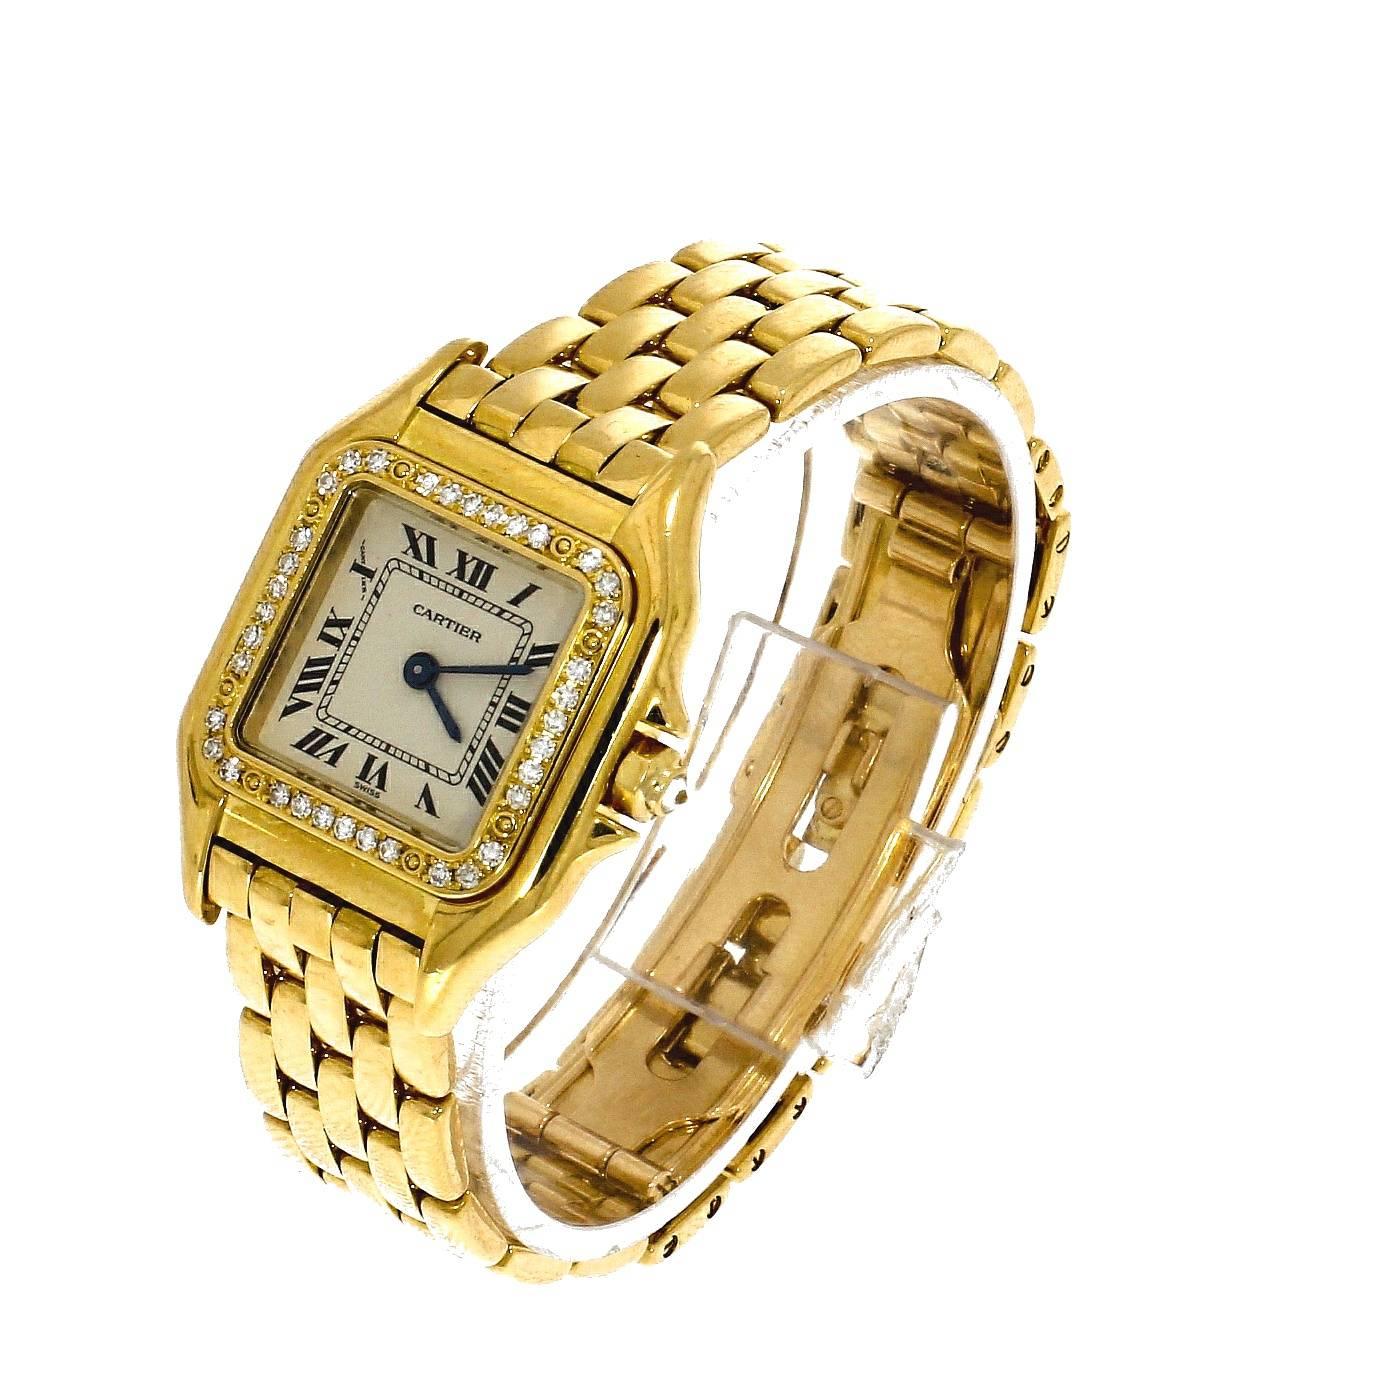 This pre-owned Cartier Panthere, has a 22mm 18K Gold case with a bezel. Fitted with a White dial. A signed 18K Gold Bracelet. With a Quartz movement. Calibre 157, Serial number reads: MG22XXXX

The Cartier Panthere originally got its name from a